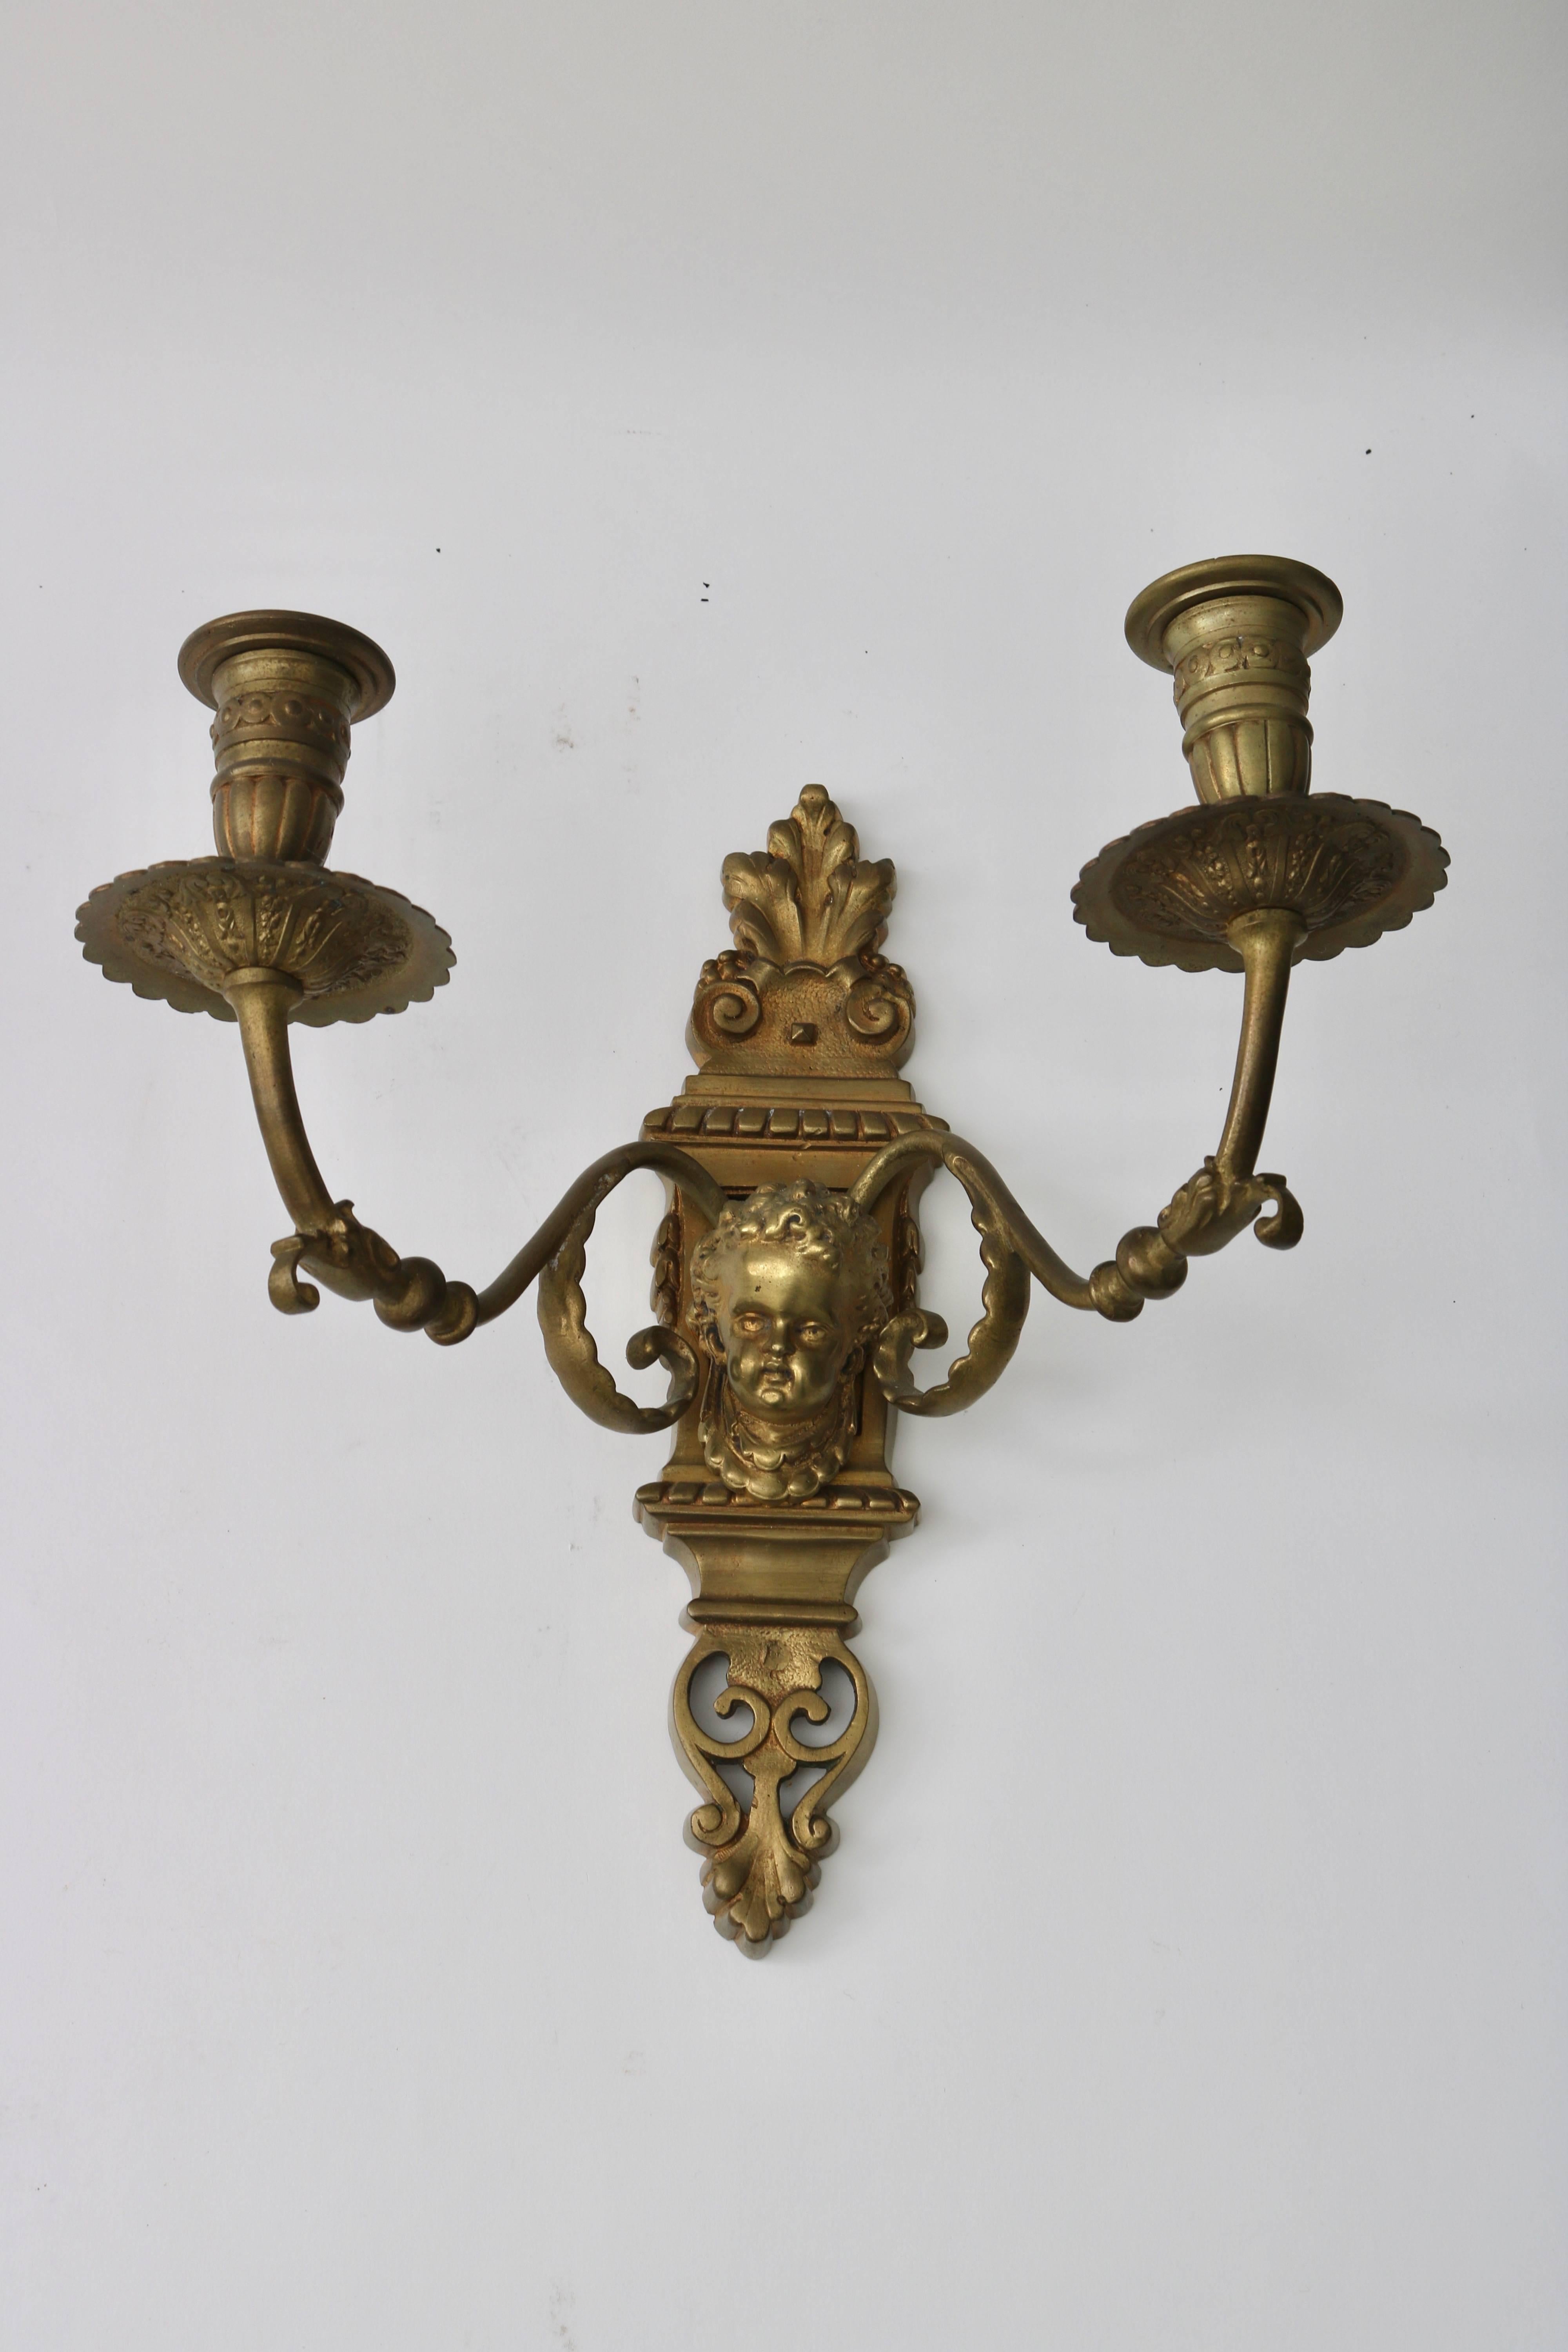 This stylish pair of wall sconces date the late 19th century and are in Louis XVI style with their restrained lines and classical details.

Note: These have not been electrified.

Note: The arms on one of the sconces in not aligned with the